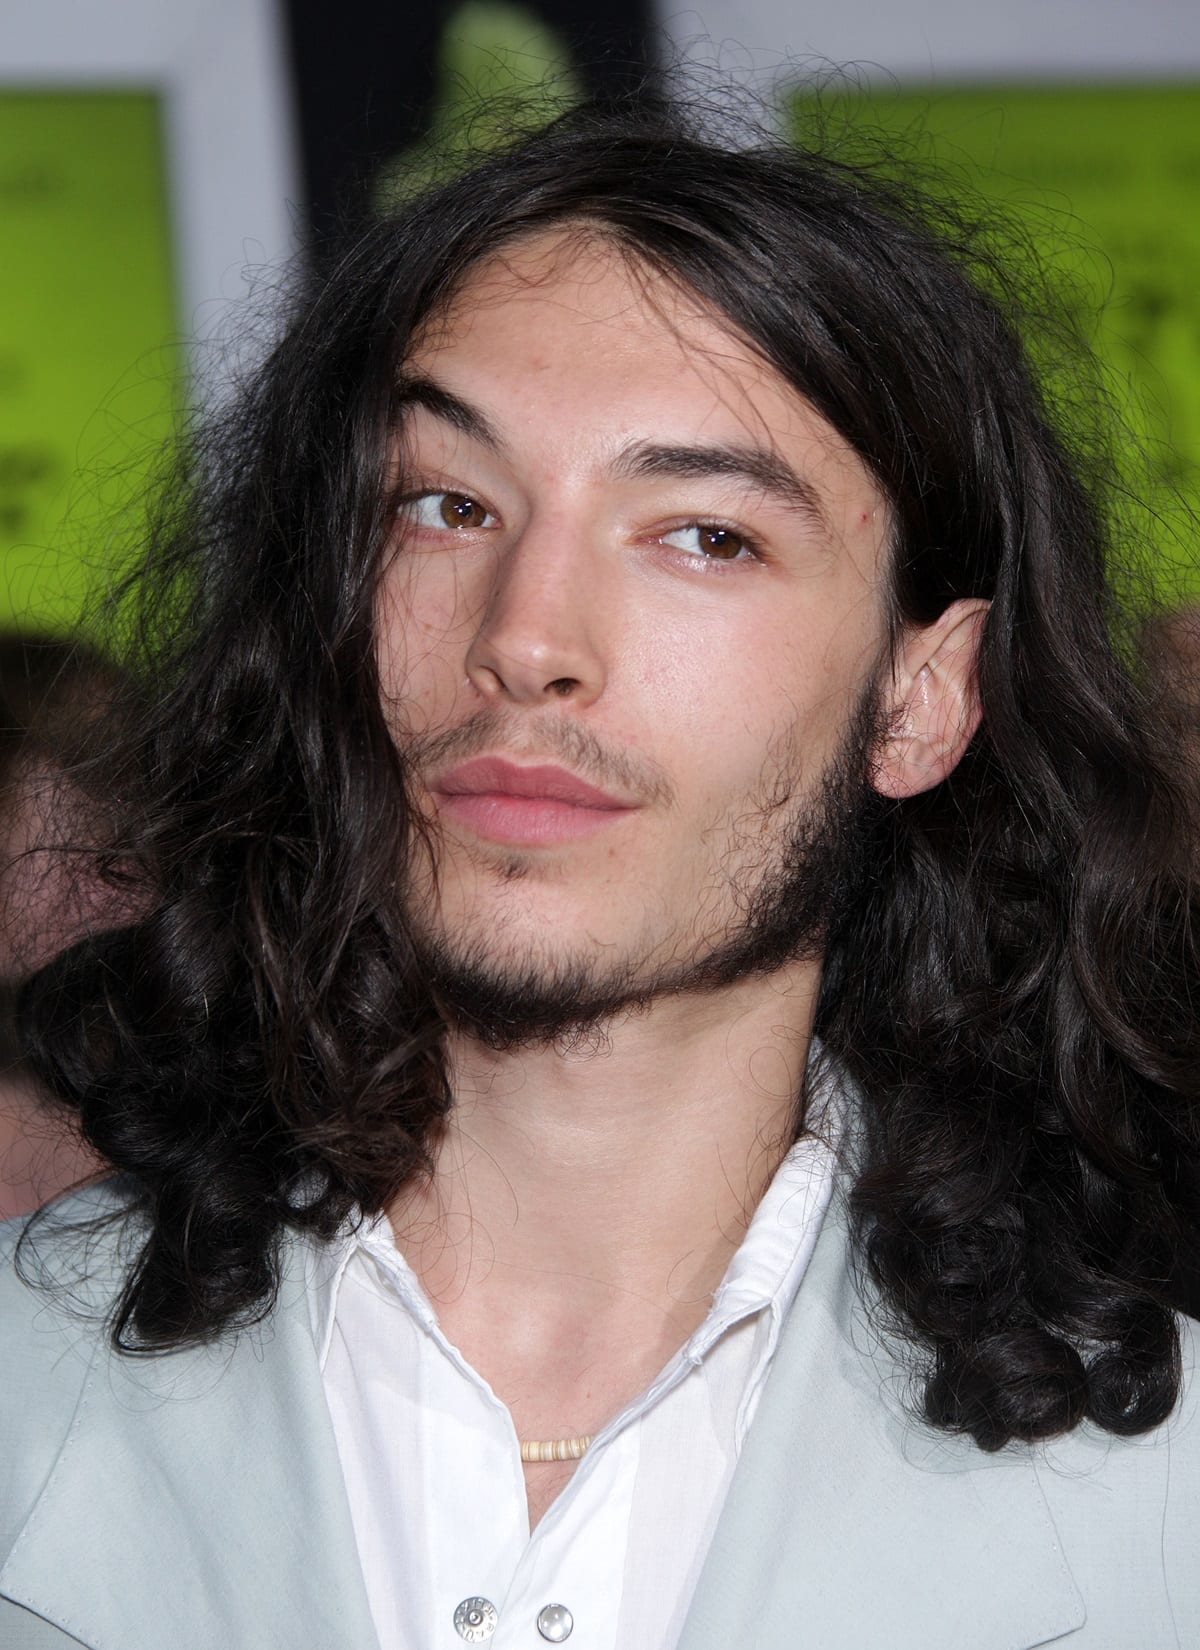 Ezra Miller at the Los Angeles premiere of The Perks of Being a Wallflower